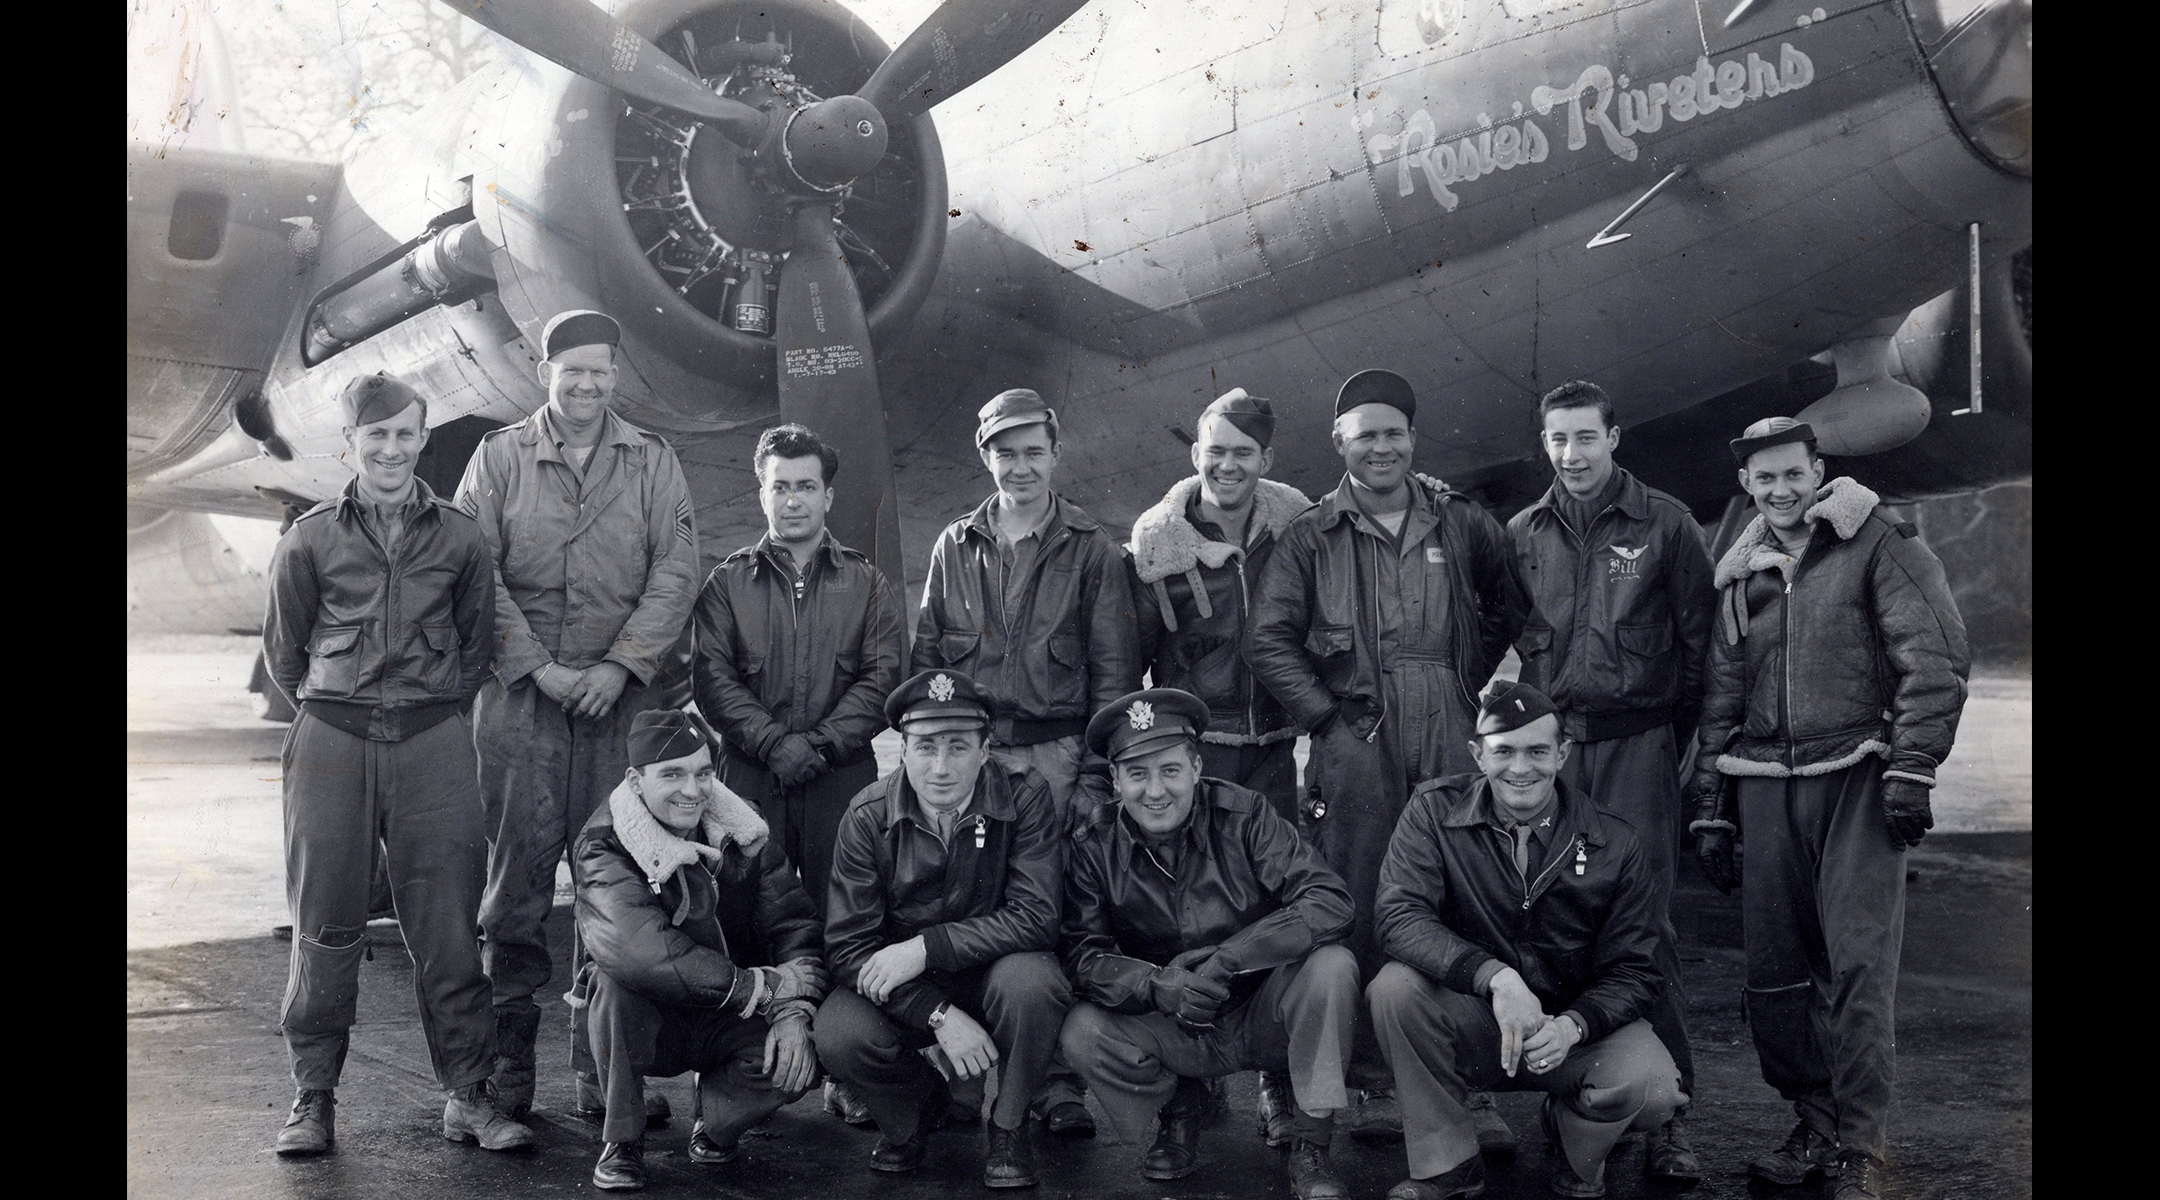 Group shot in front of air force plane